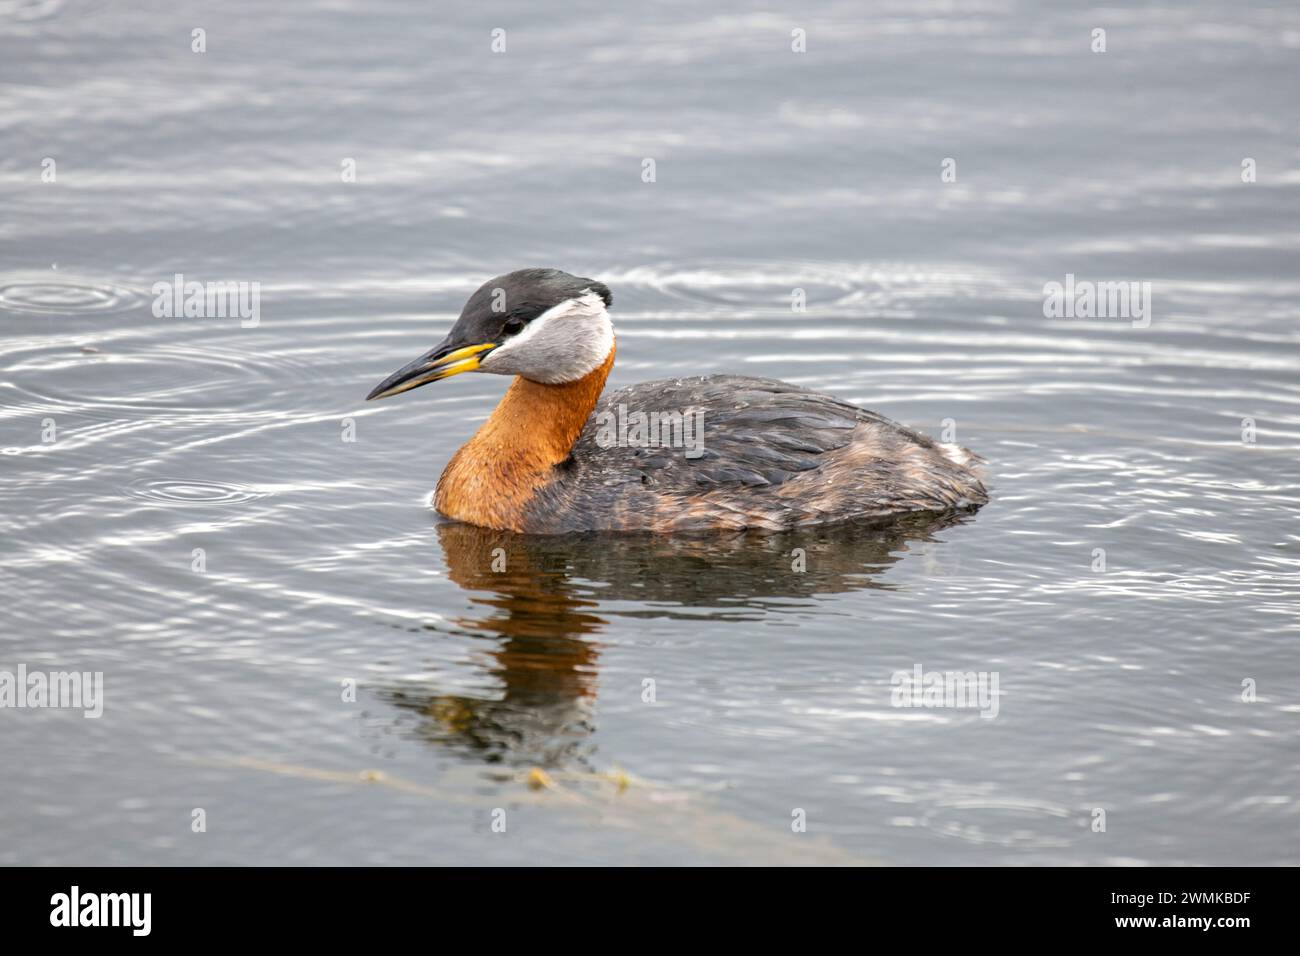 Close-up portrait of a red-necked grebe (Podiceps grisegena) swimming in a pond near 108 Mile Heritage House on the Cariboo Highway in British Colu... Stock Photo